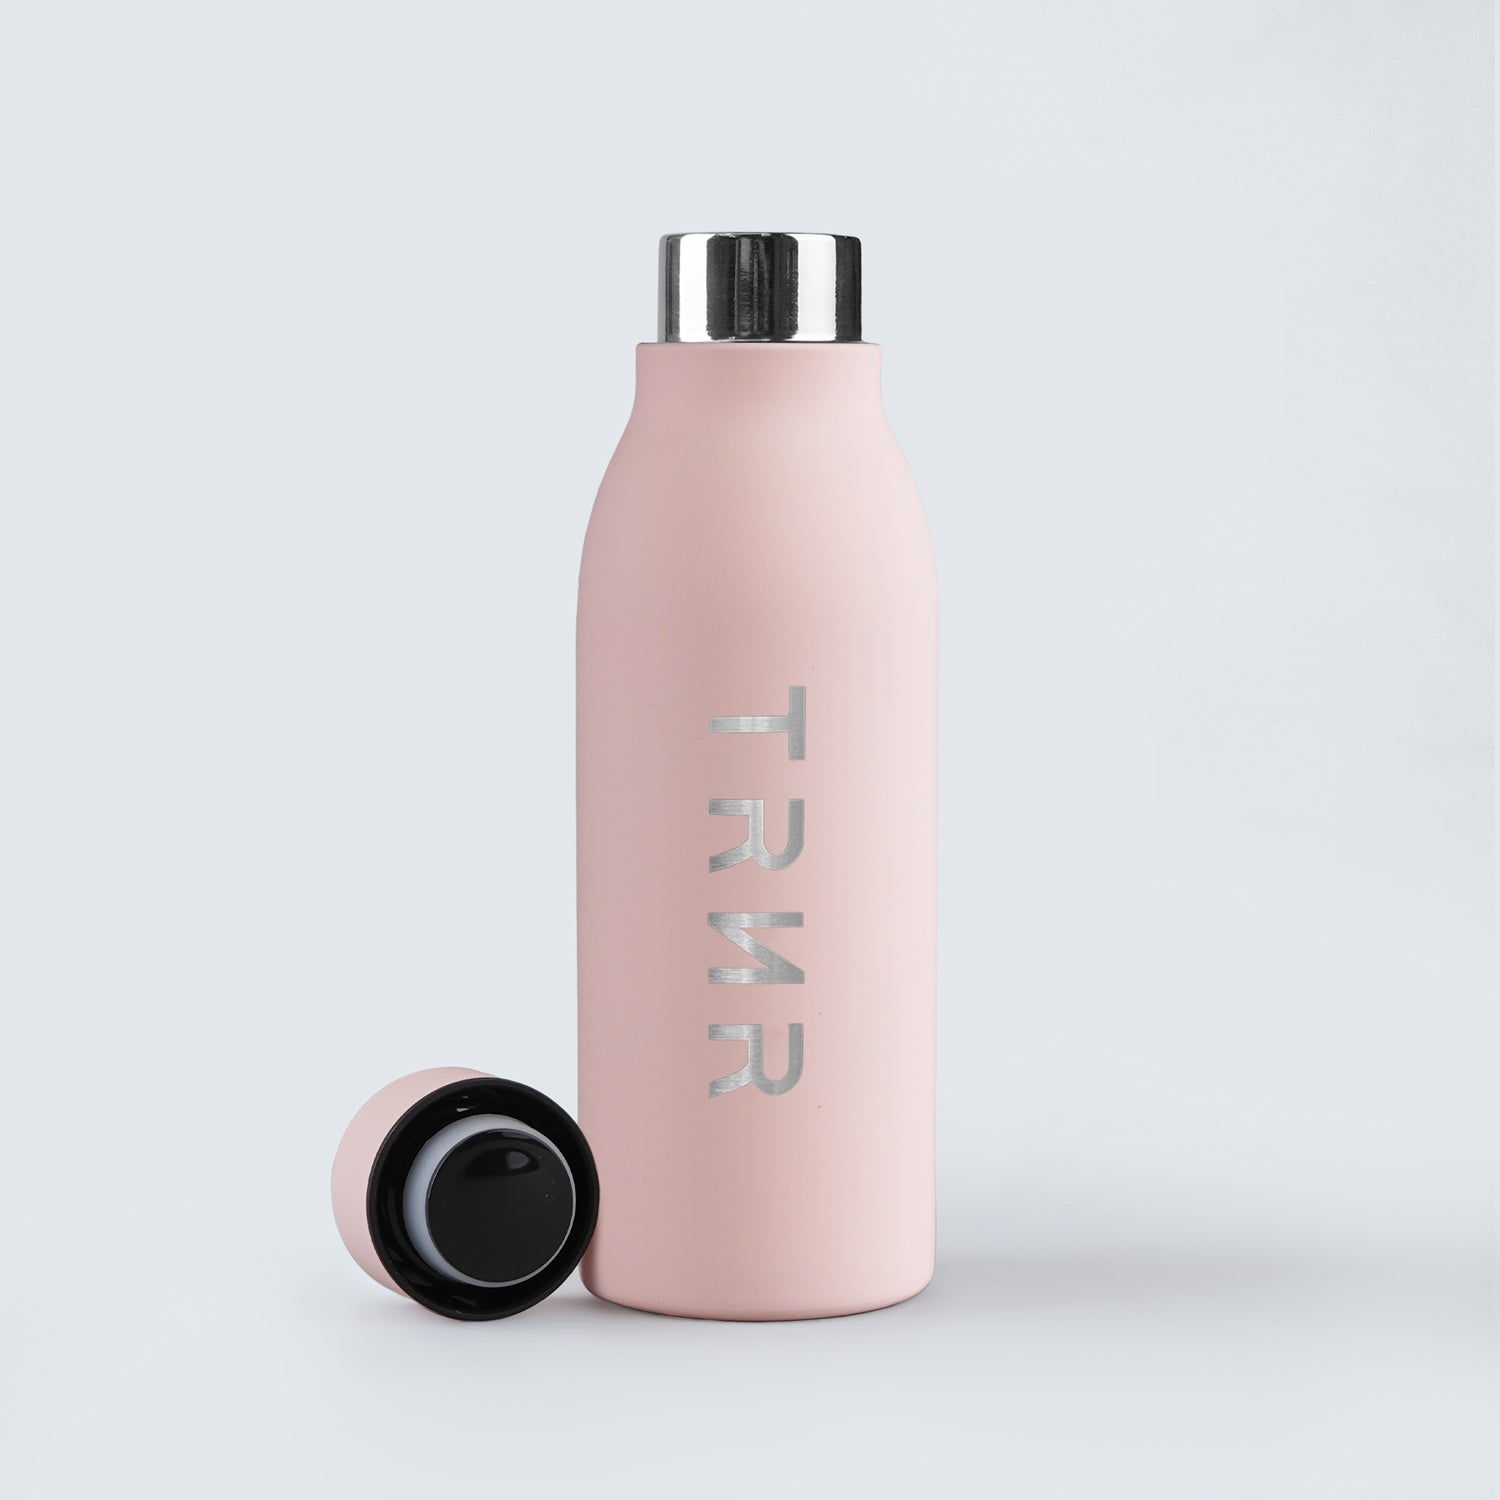 TRNR Bliss Bottle (Blush Pink) in 600 ml capacity | Product Overview Featuring TRNR Logo and Powder-Coated Finish - Open Lid